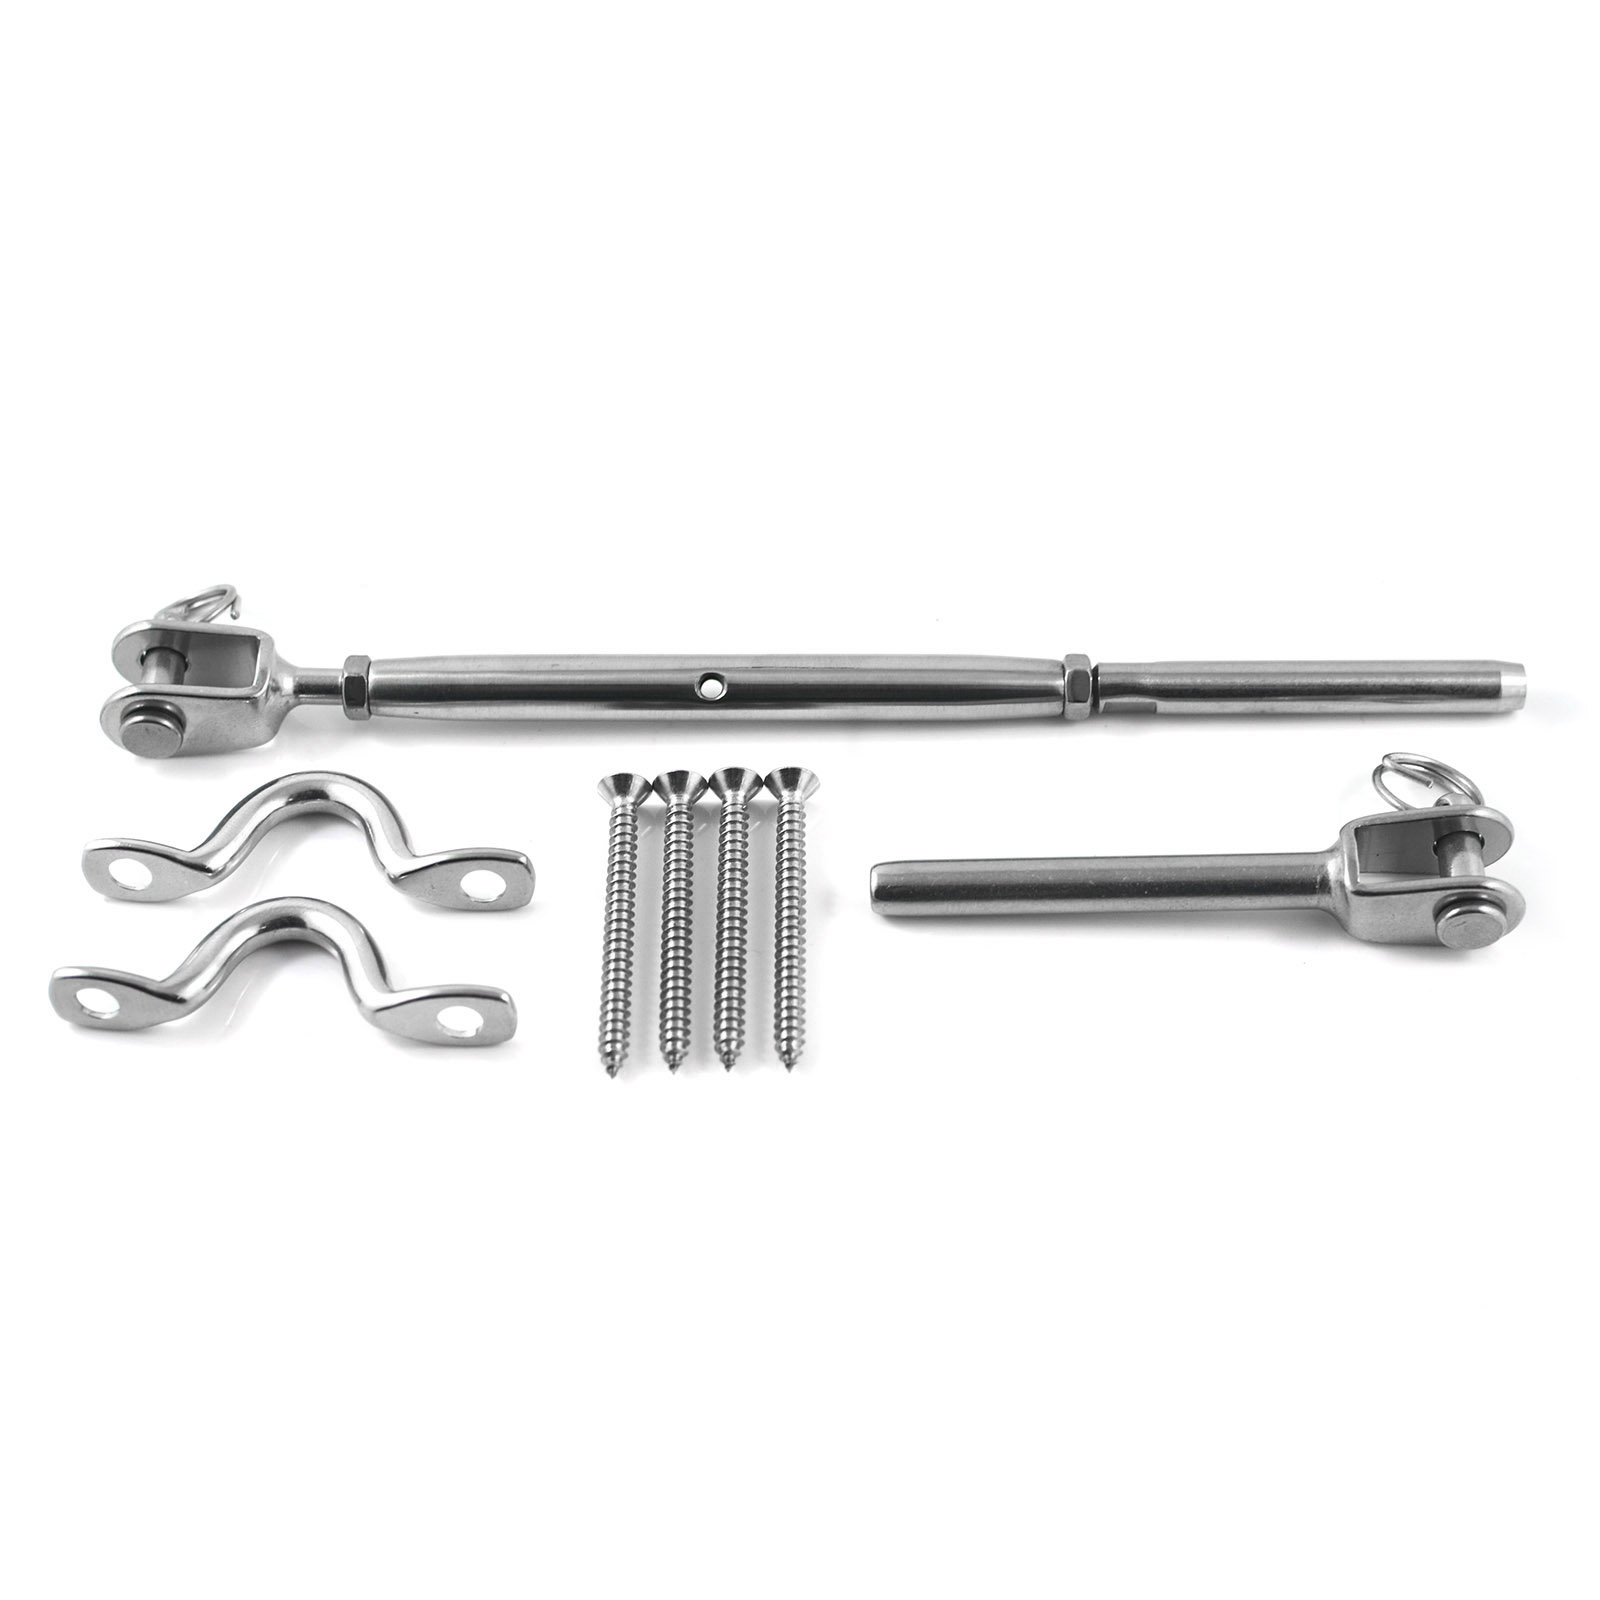 Jaw/Swage Bottlescrew Stainless for 4.0mm Wire Balustrade Kit #403